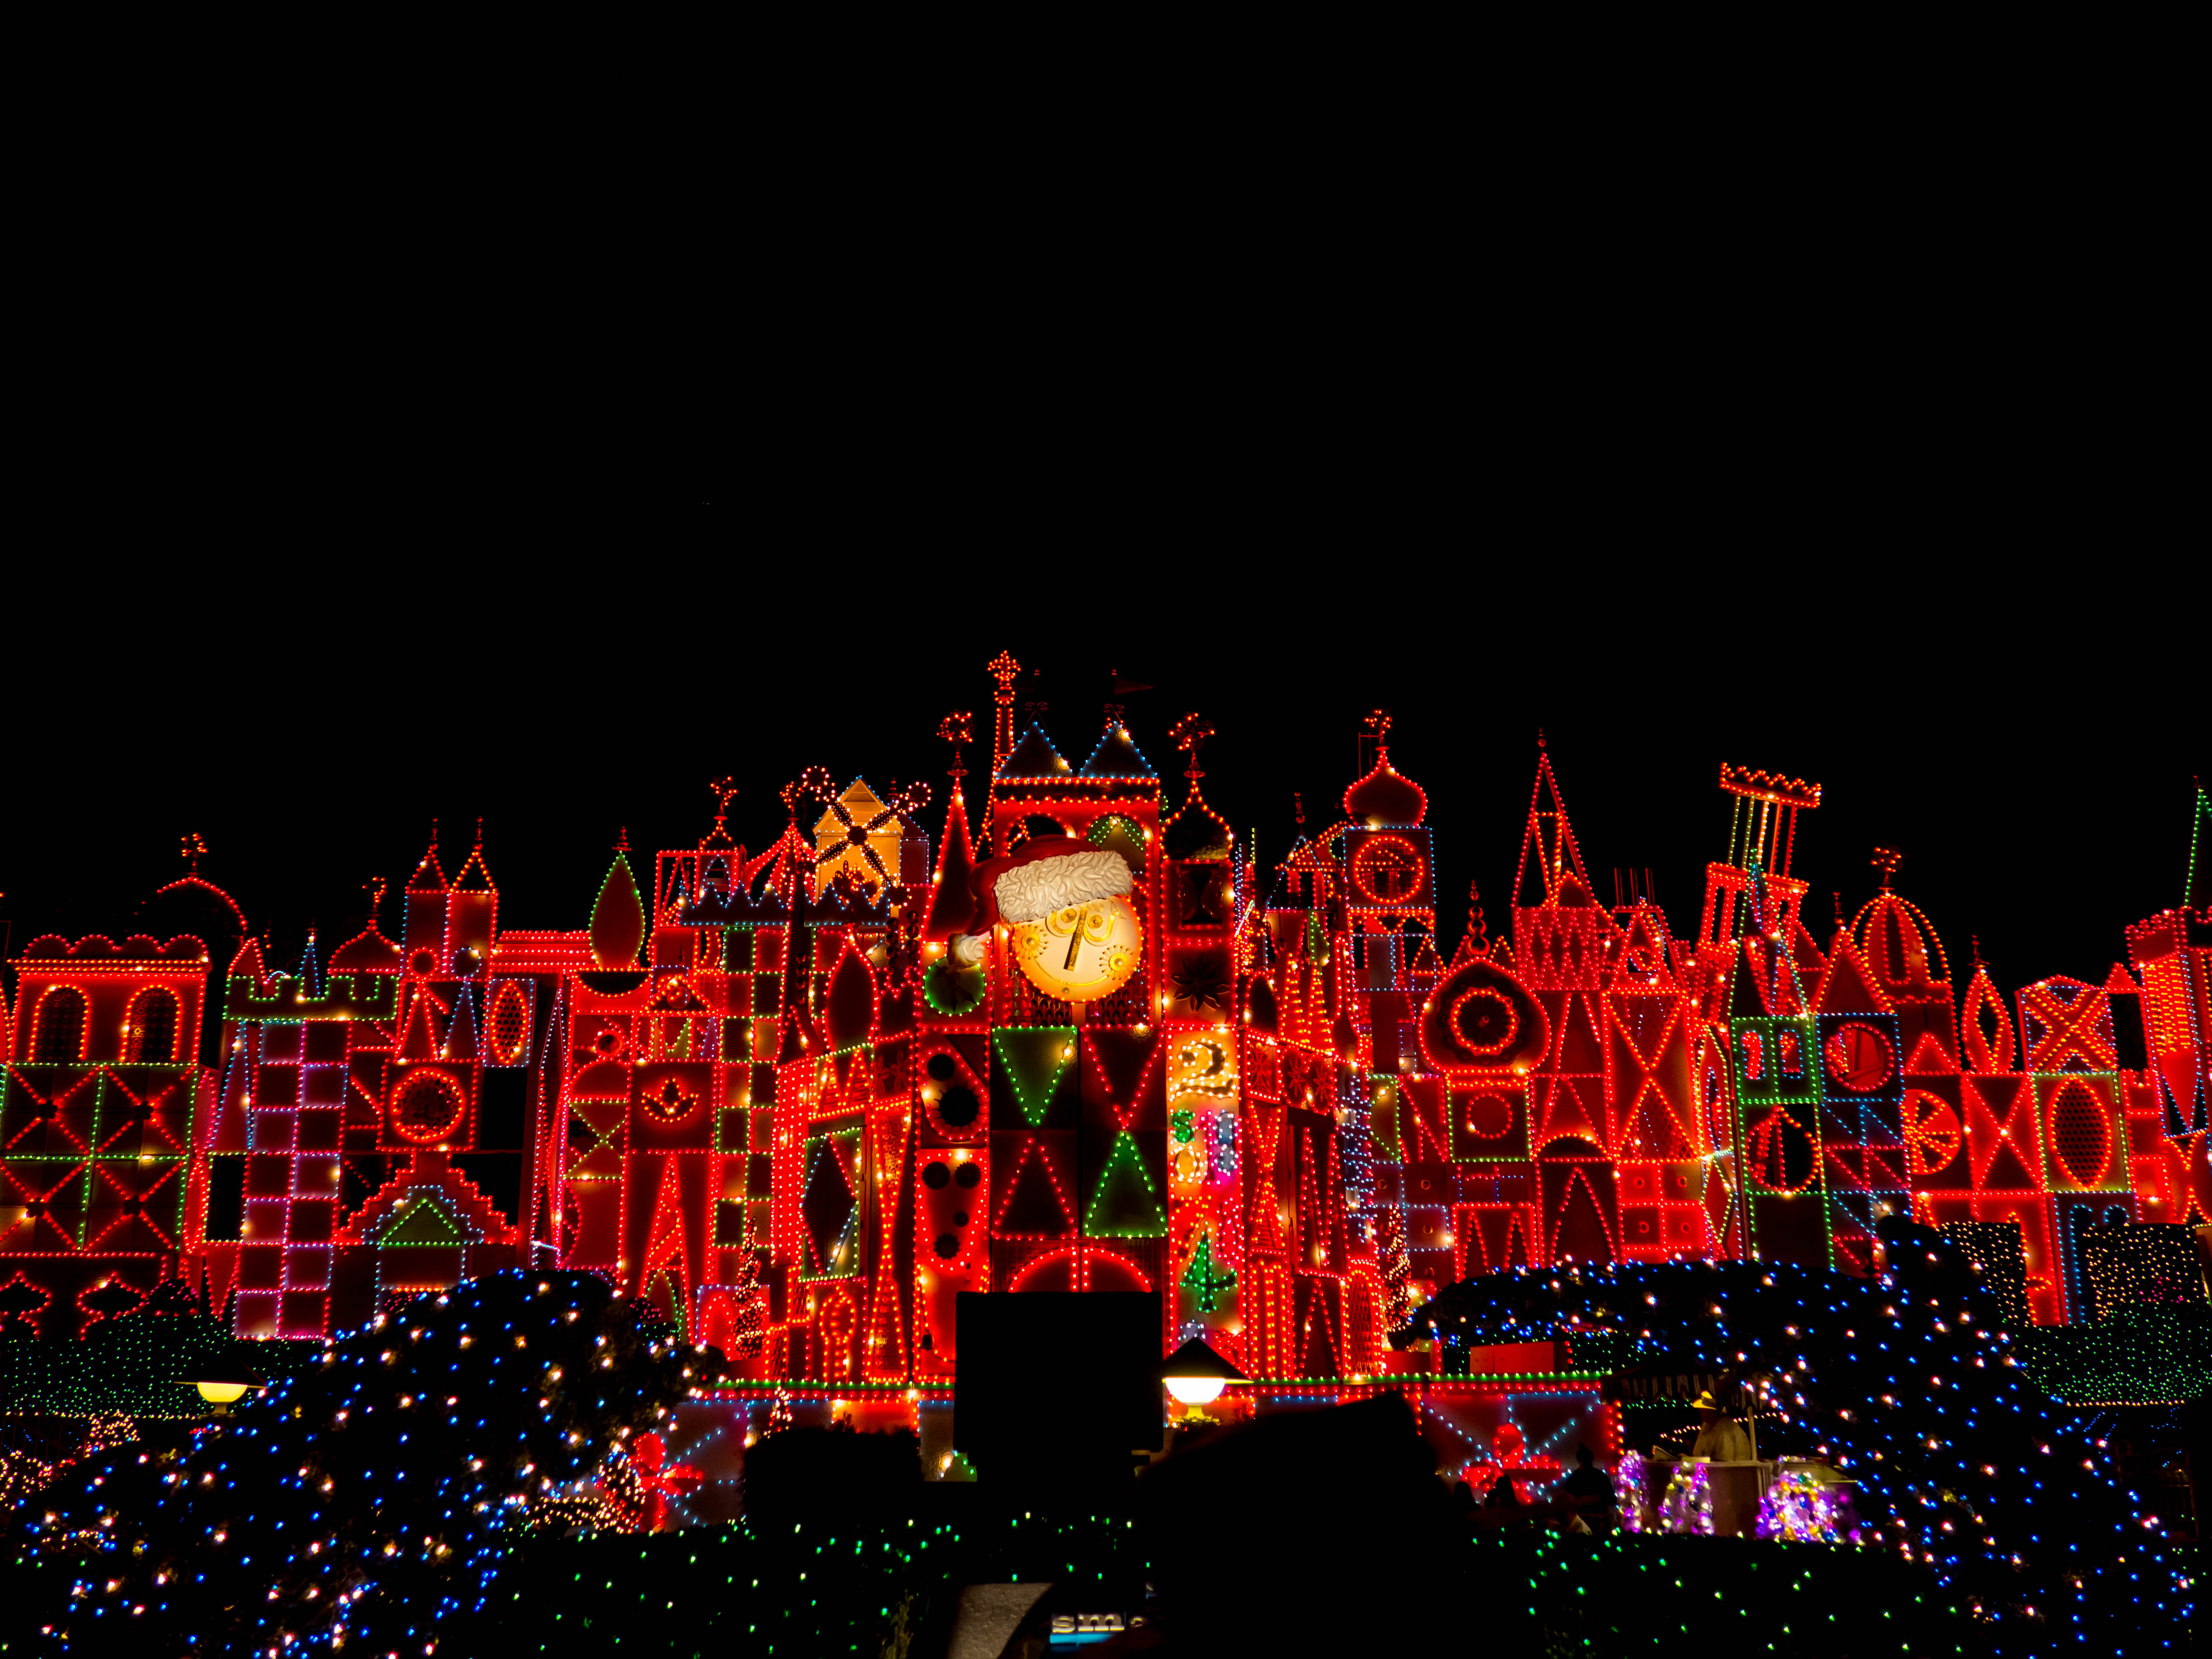 Things to do and see at Disneyland's Festival of Holidays